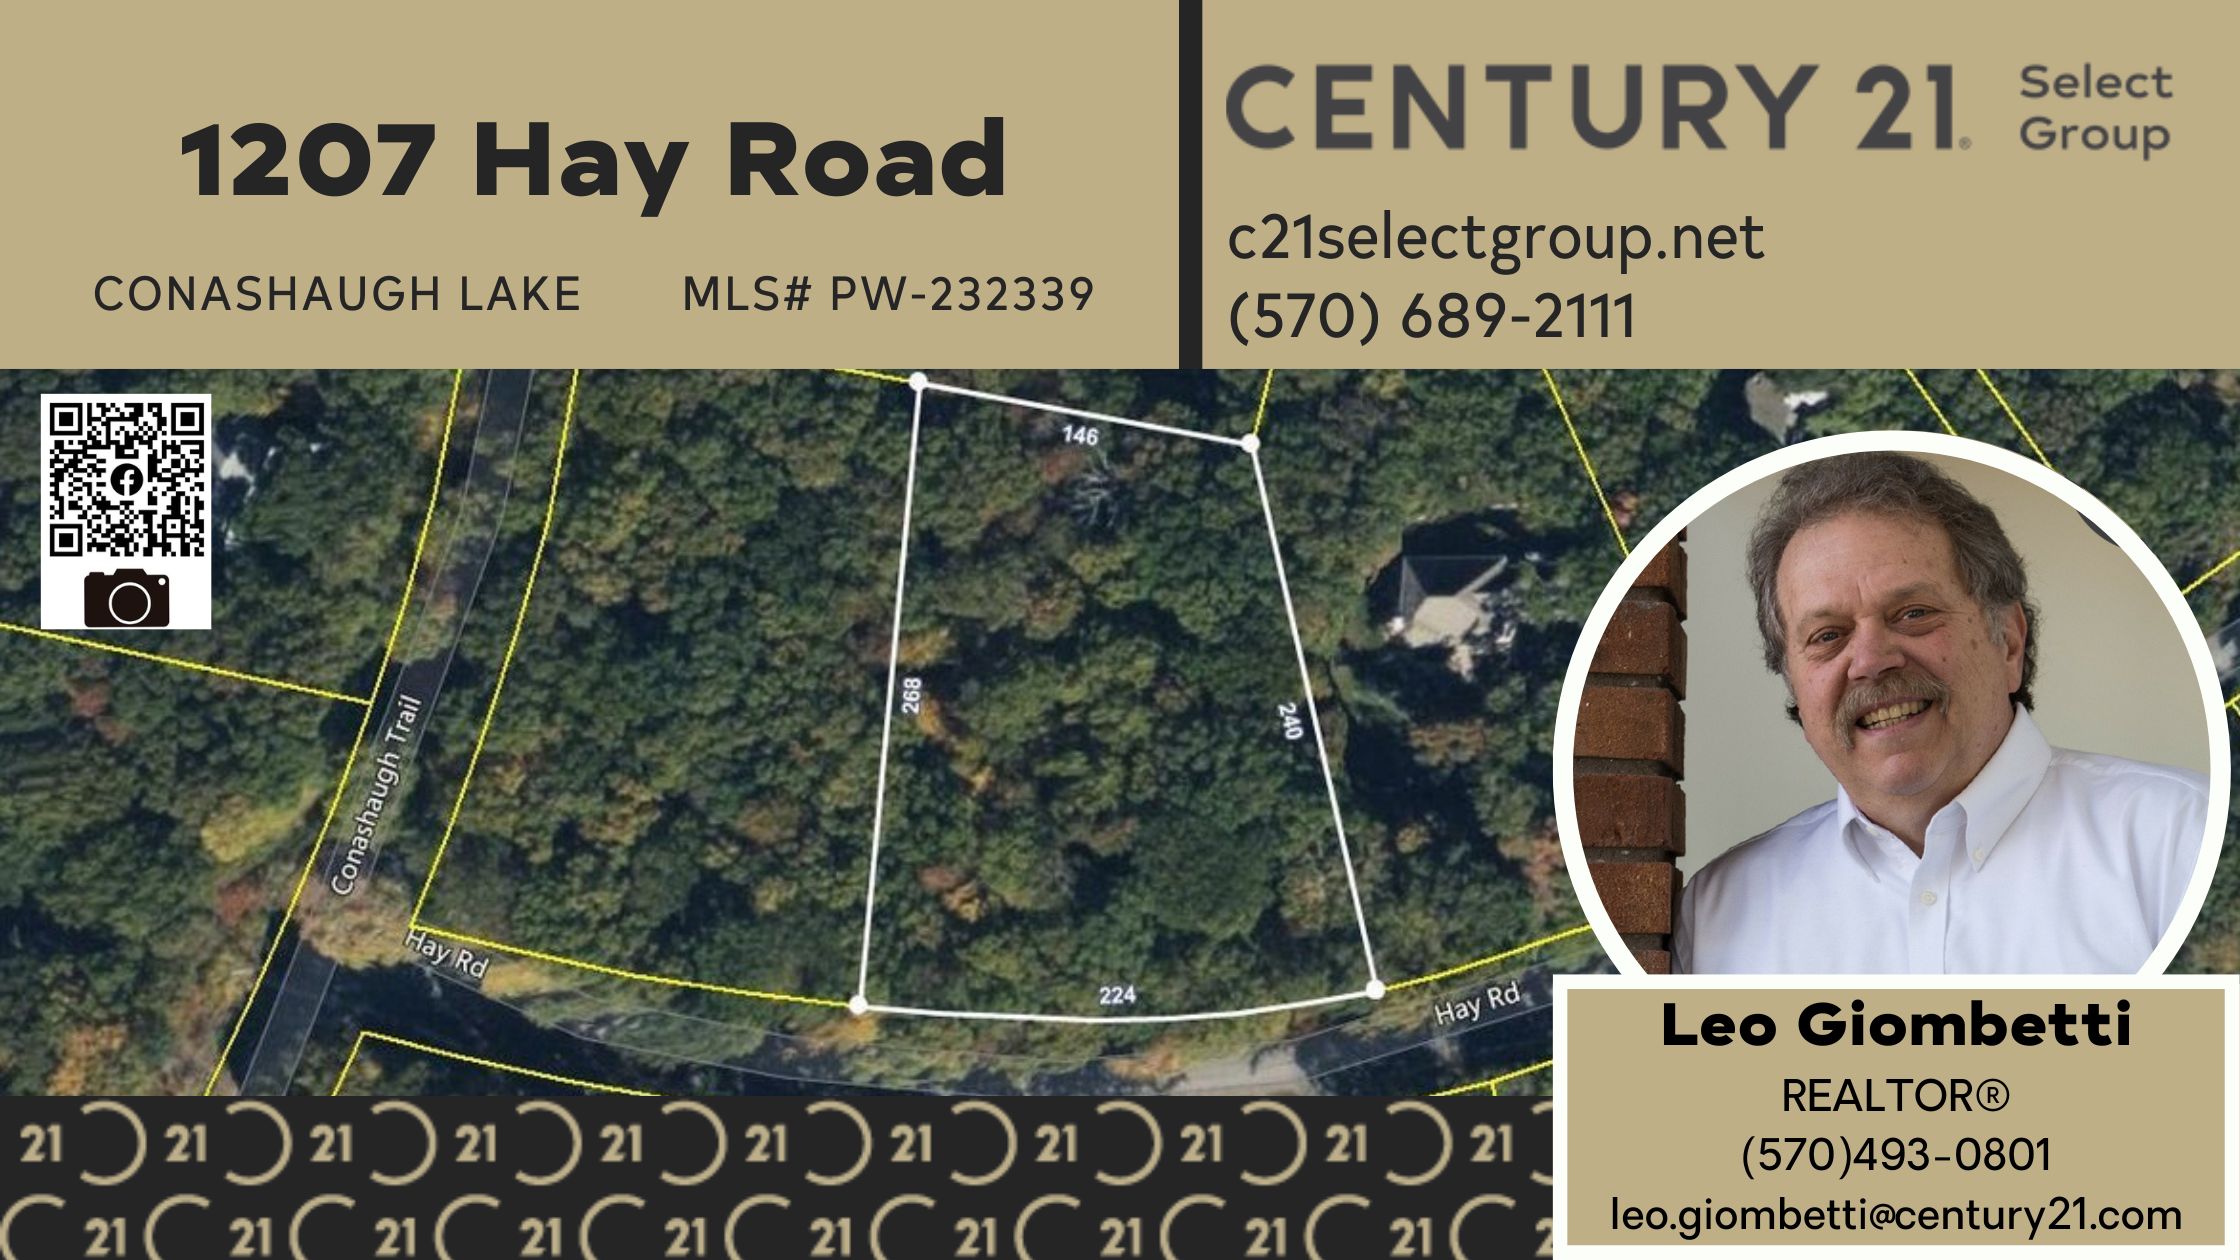 1207 Hay Road: Land in Community with Amenities